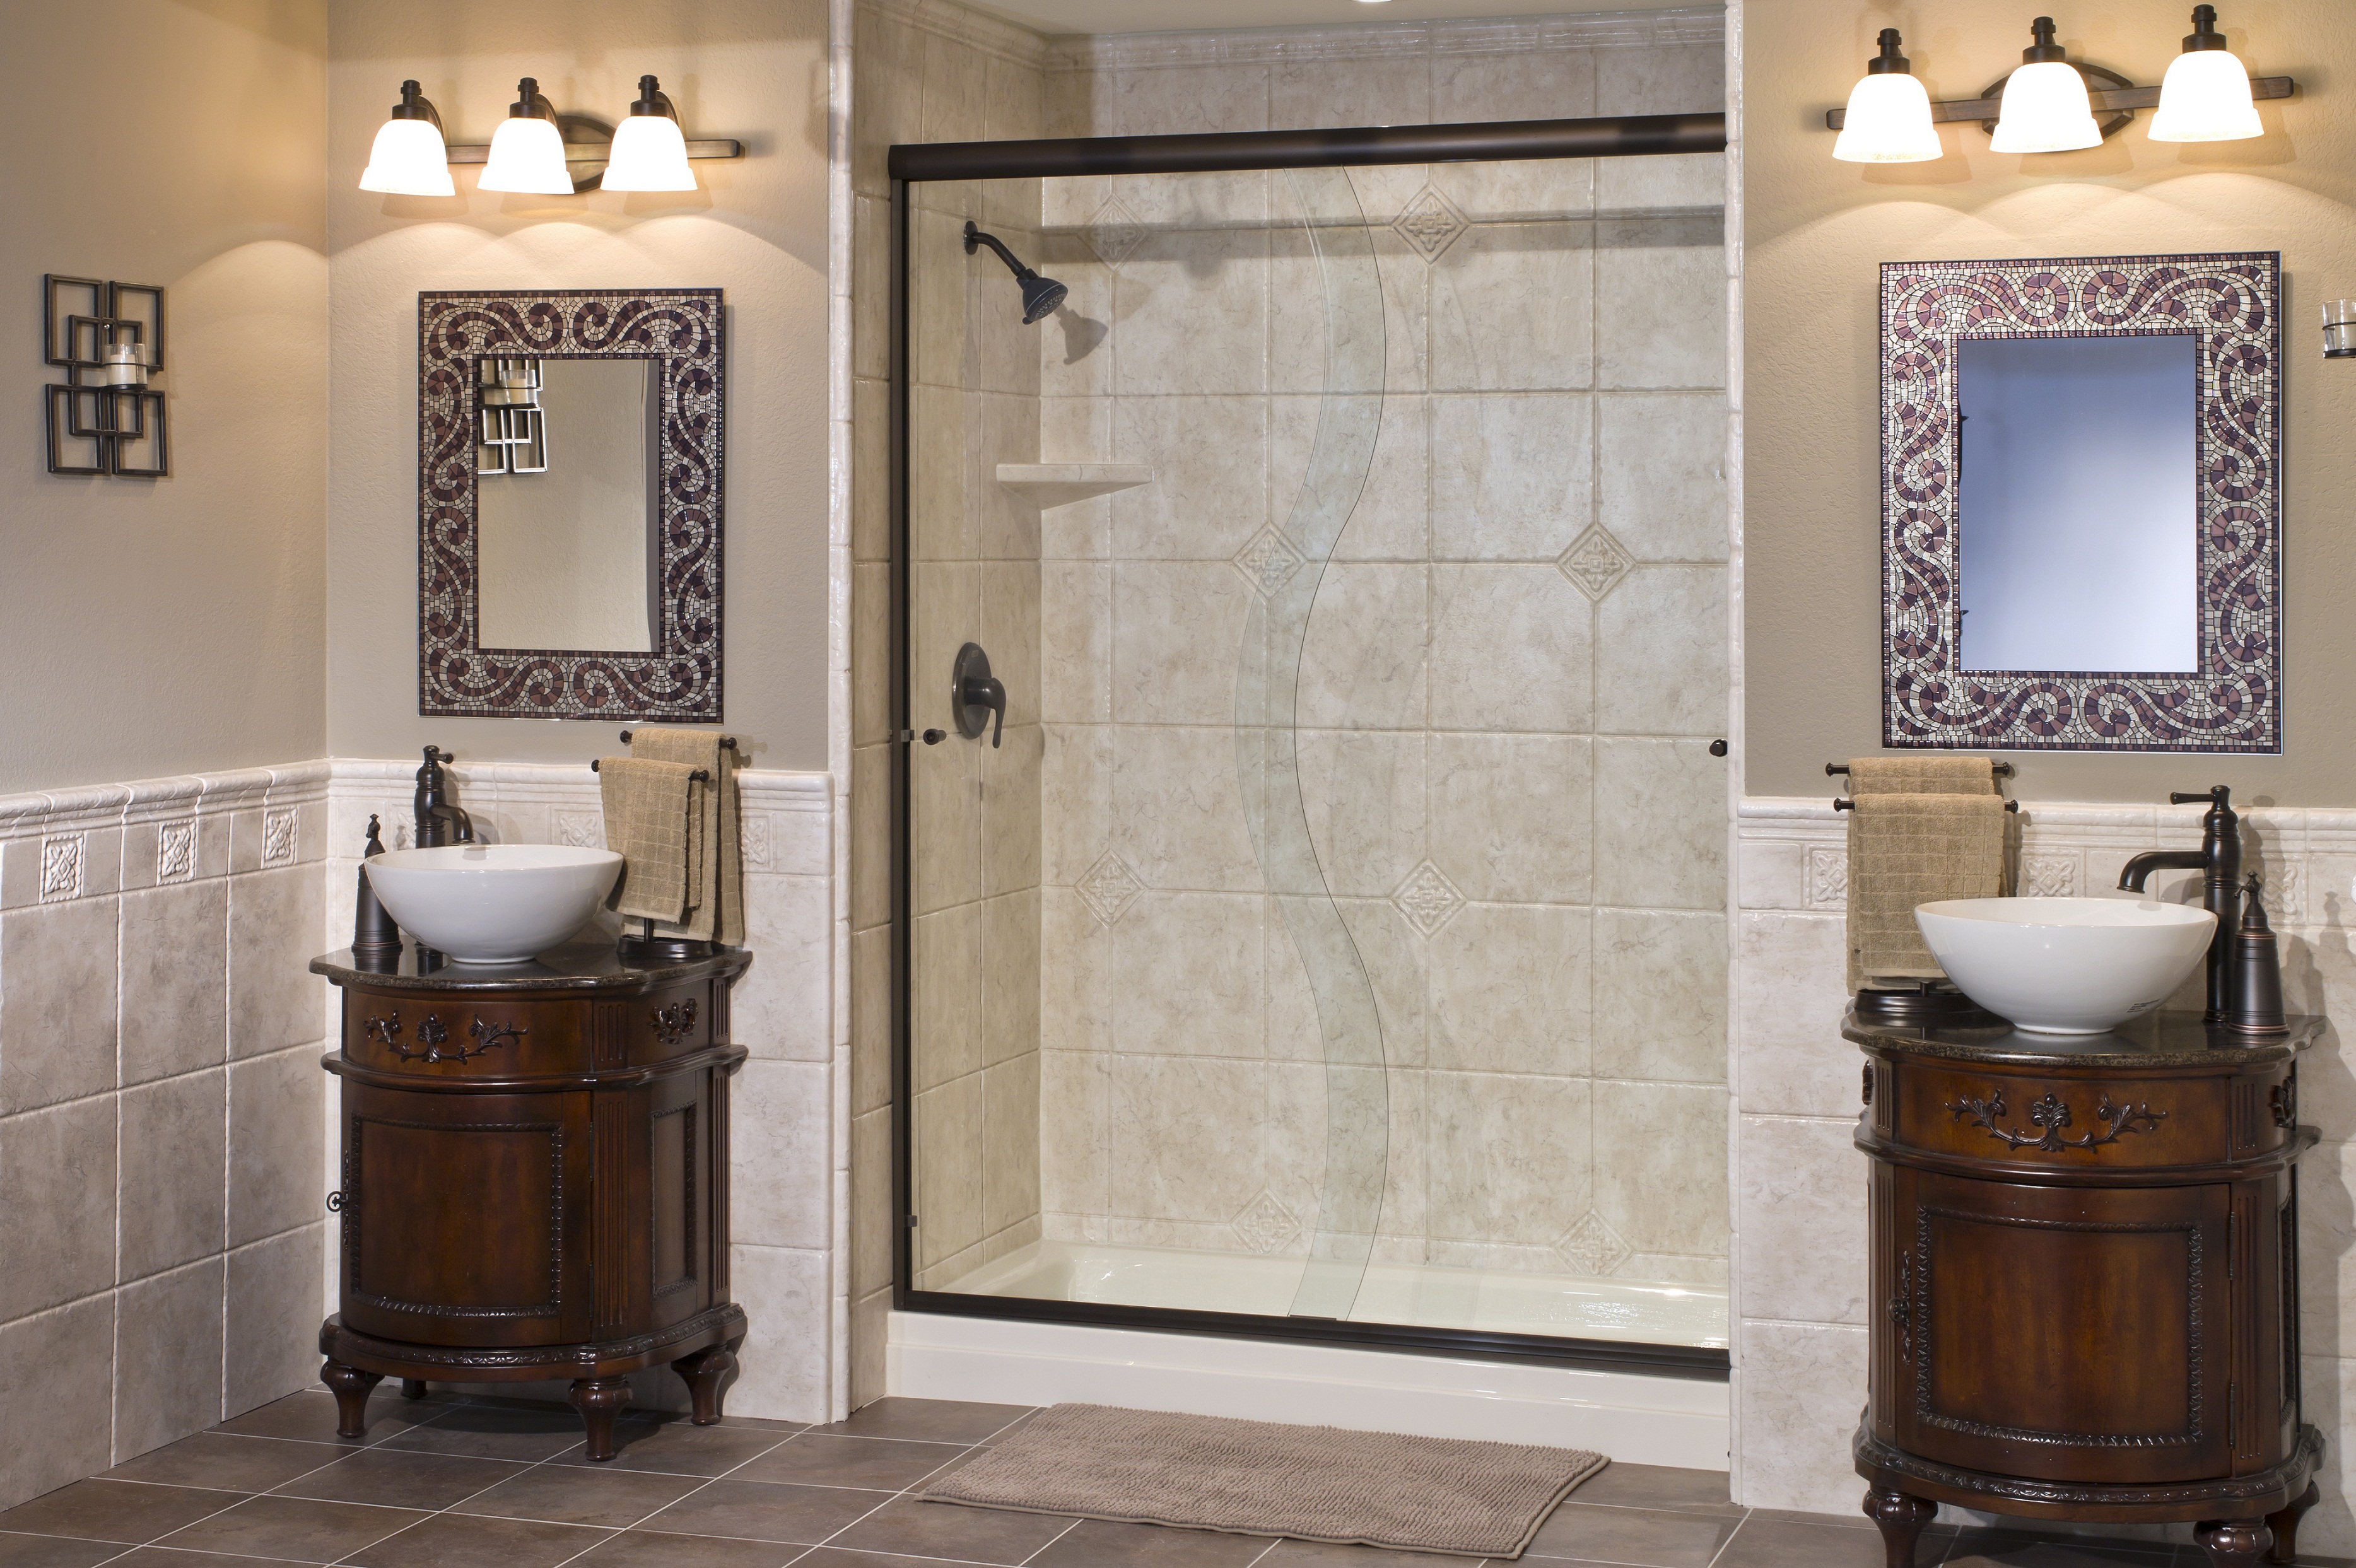 Tivoli Travertine is one of the new colors ReBath Northeast is bringing to the Home Shows.